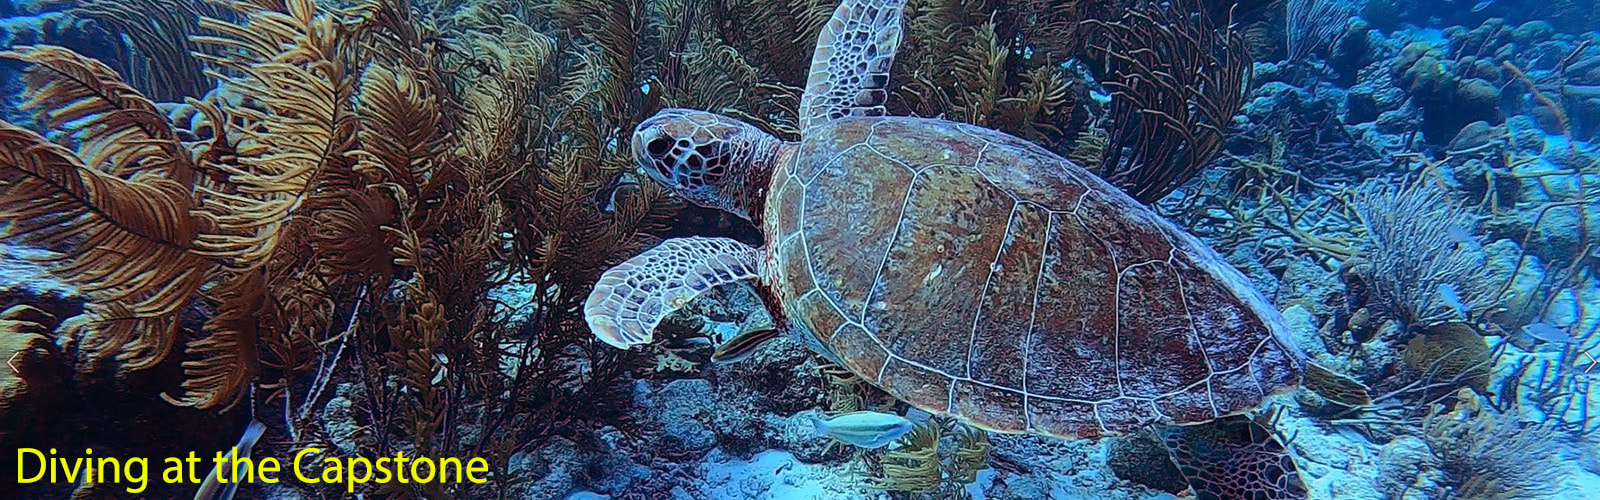 sea turtle off the coast of Bonaire with the text 